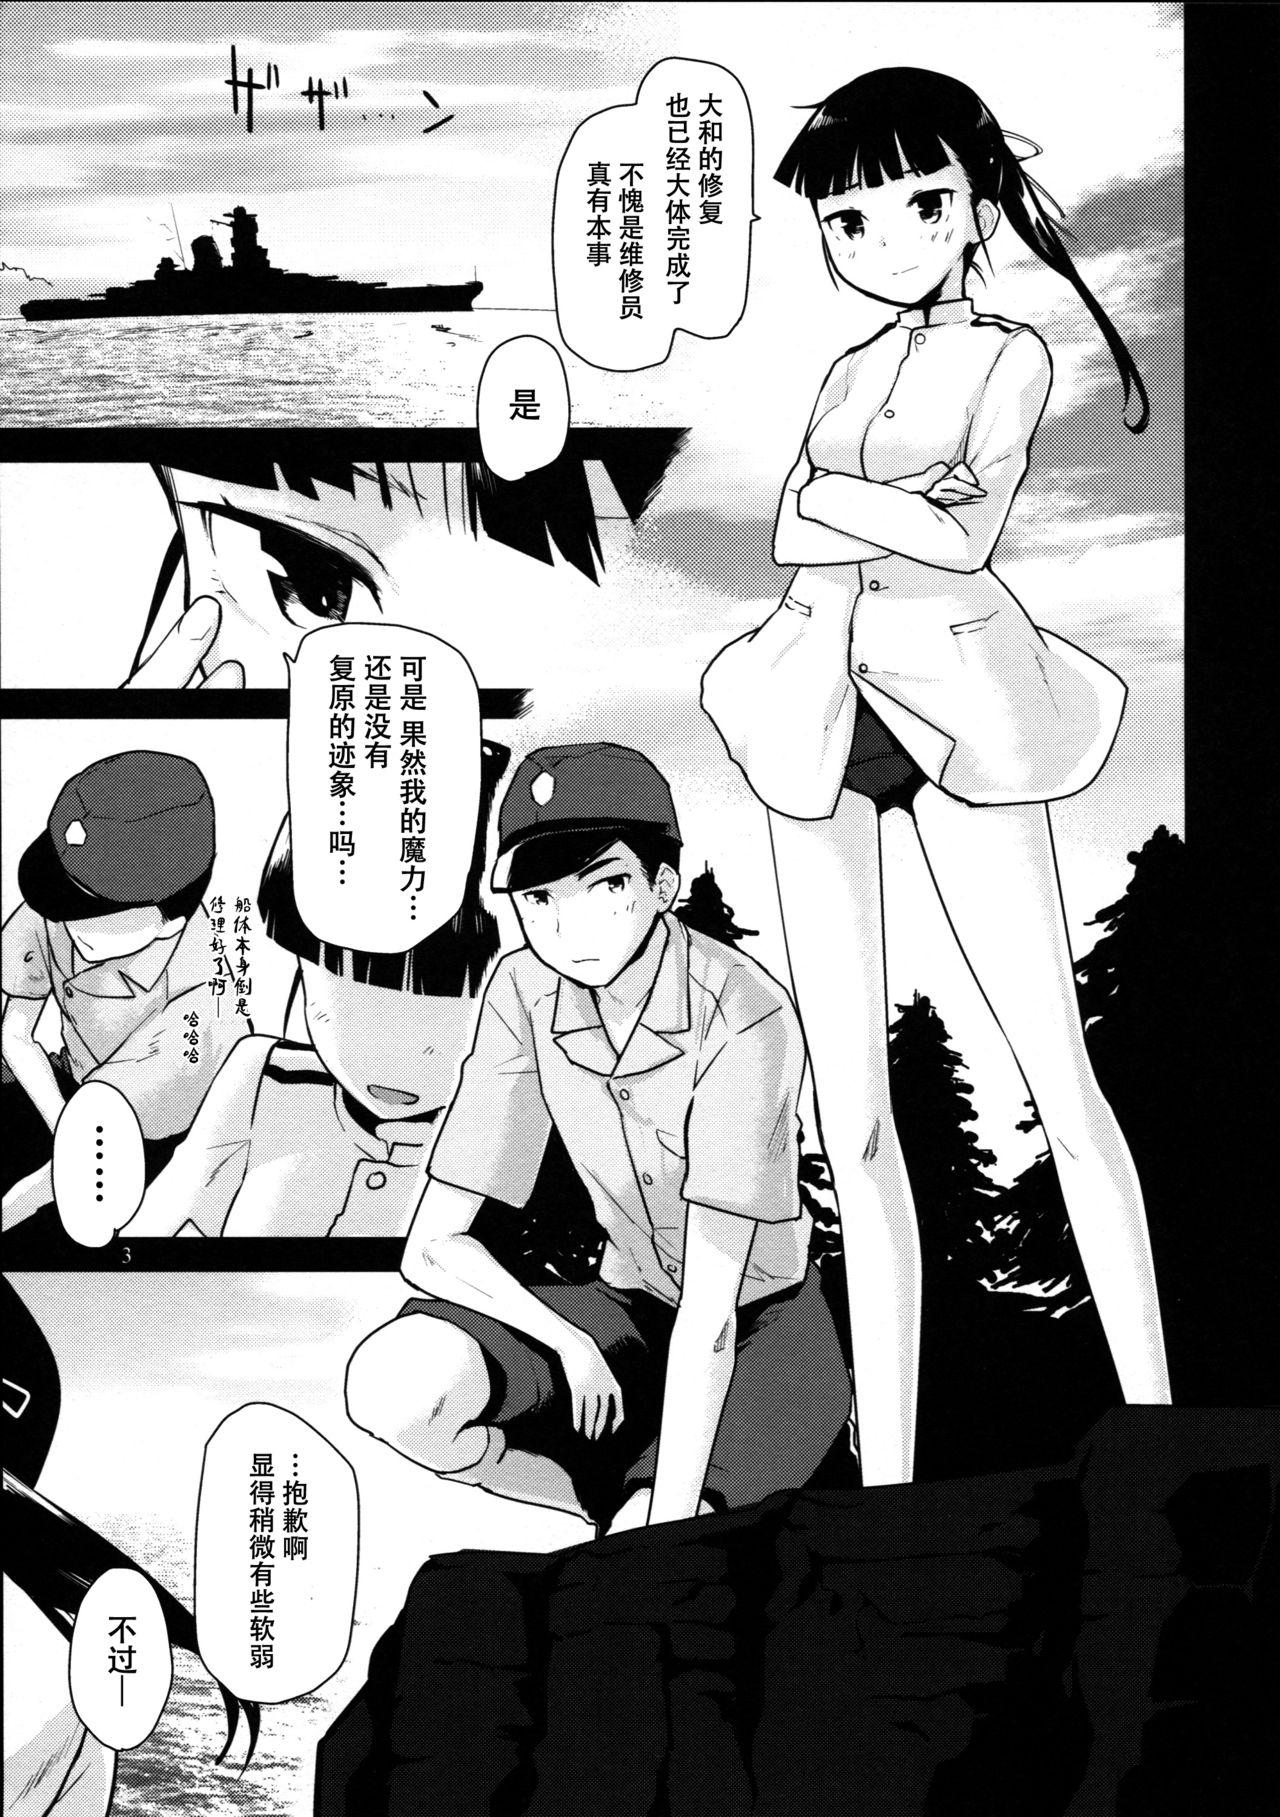 Abuse LOST. - Strike witches Lesbians - Page 4